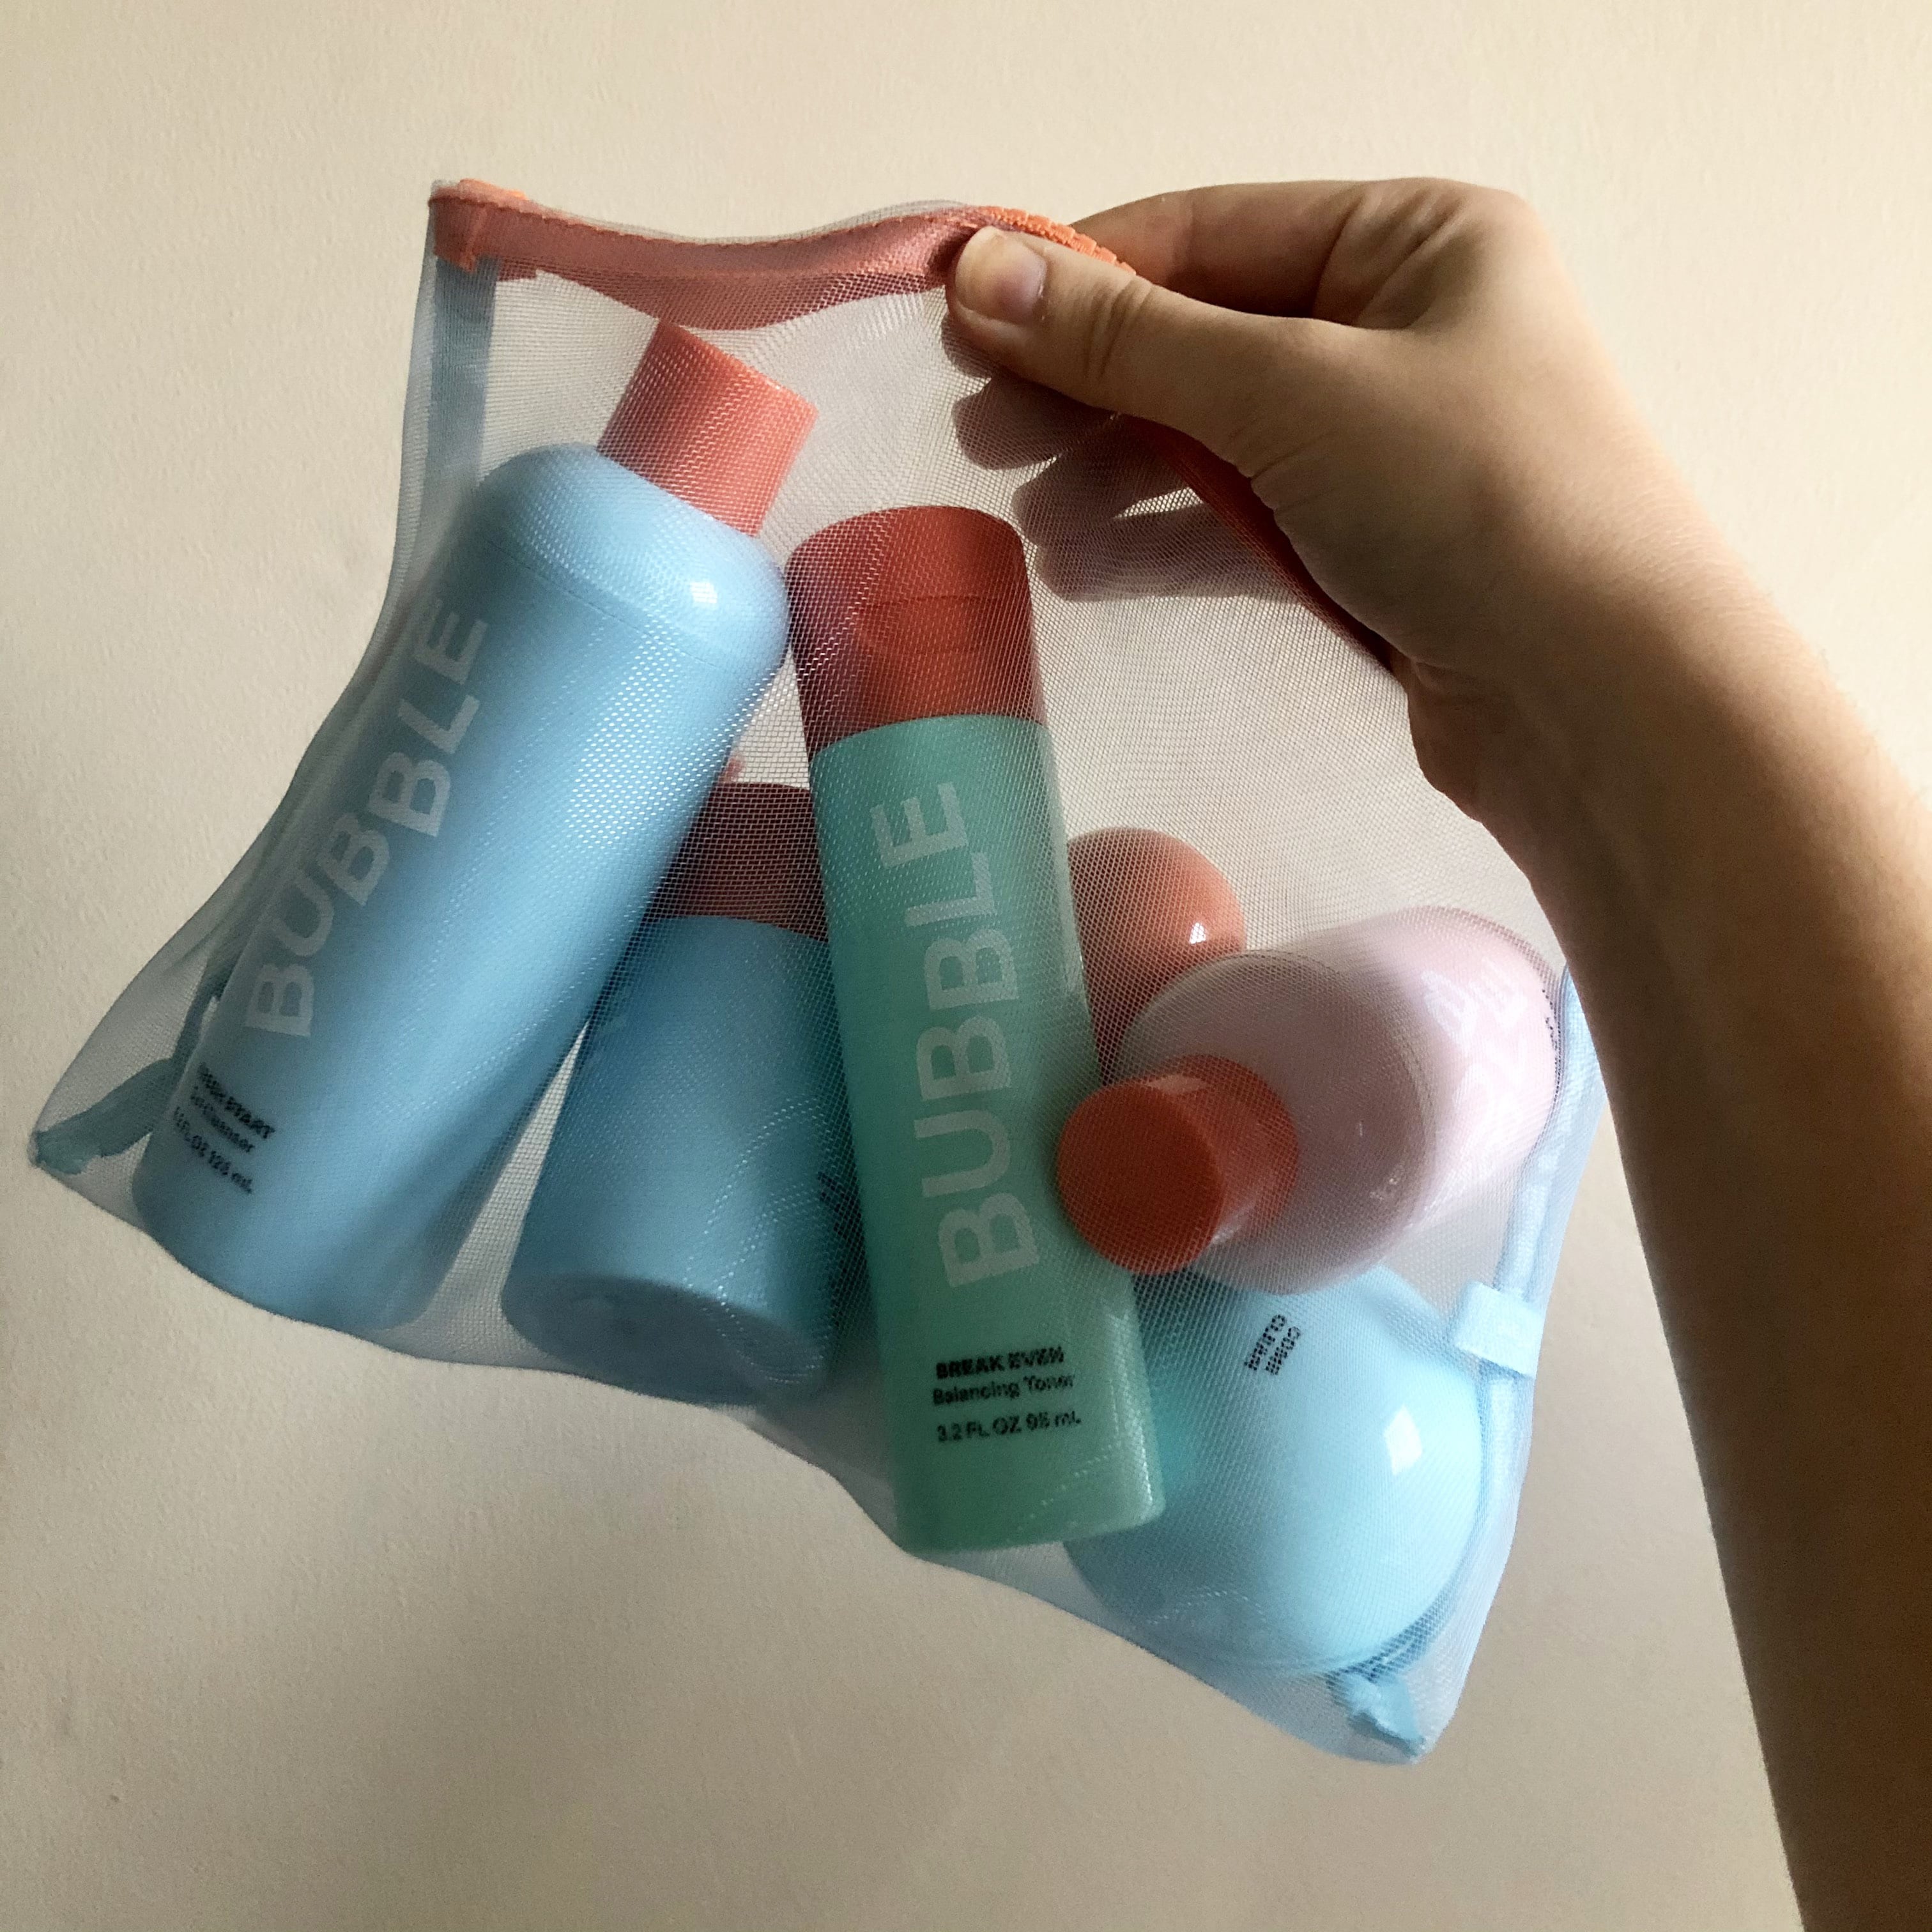 Gen Z Acne Solutions : Bubble skincare products